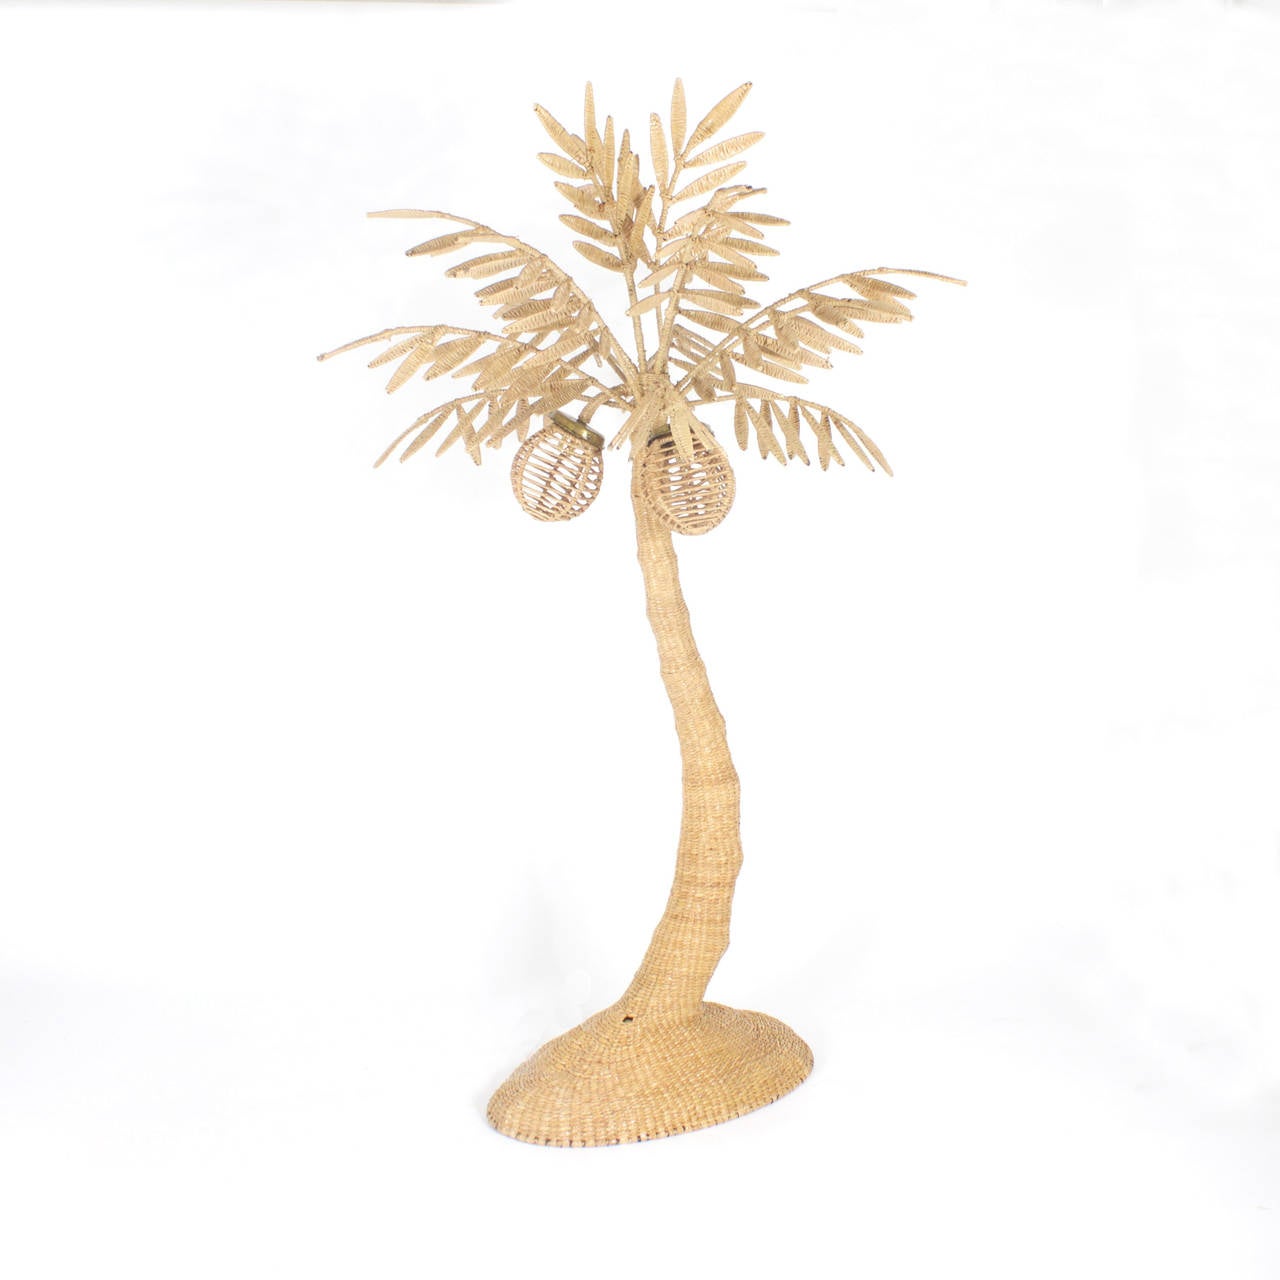 Folky Mario Torres palm tree floor lamp constructed of a metal frame wrapped with wicker or reed. Having a tropical organic vibe with 3 coconuts as lights. This floor lamp is a mid century interpretation of an age old Palm tree motif. Perfect for